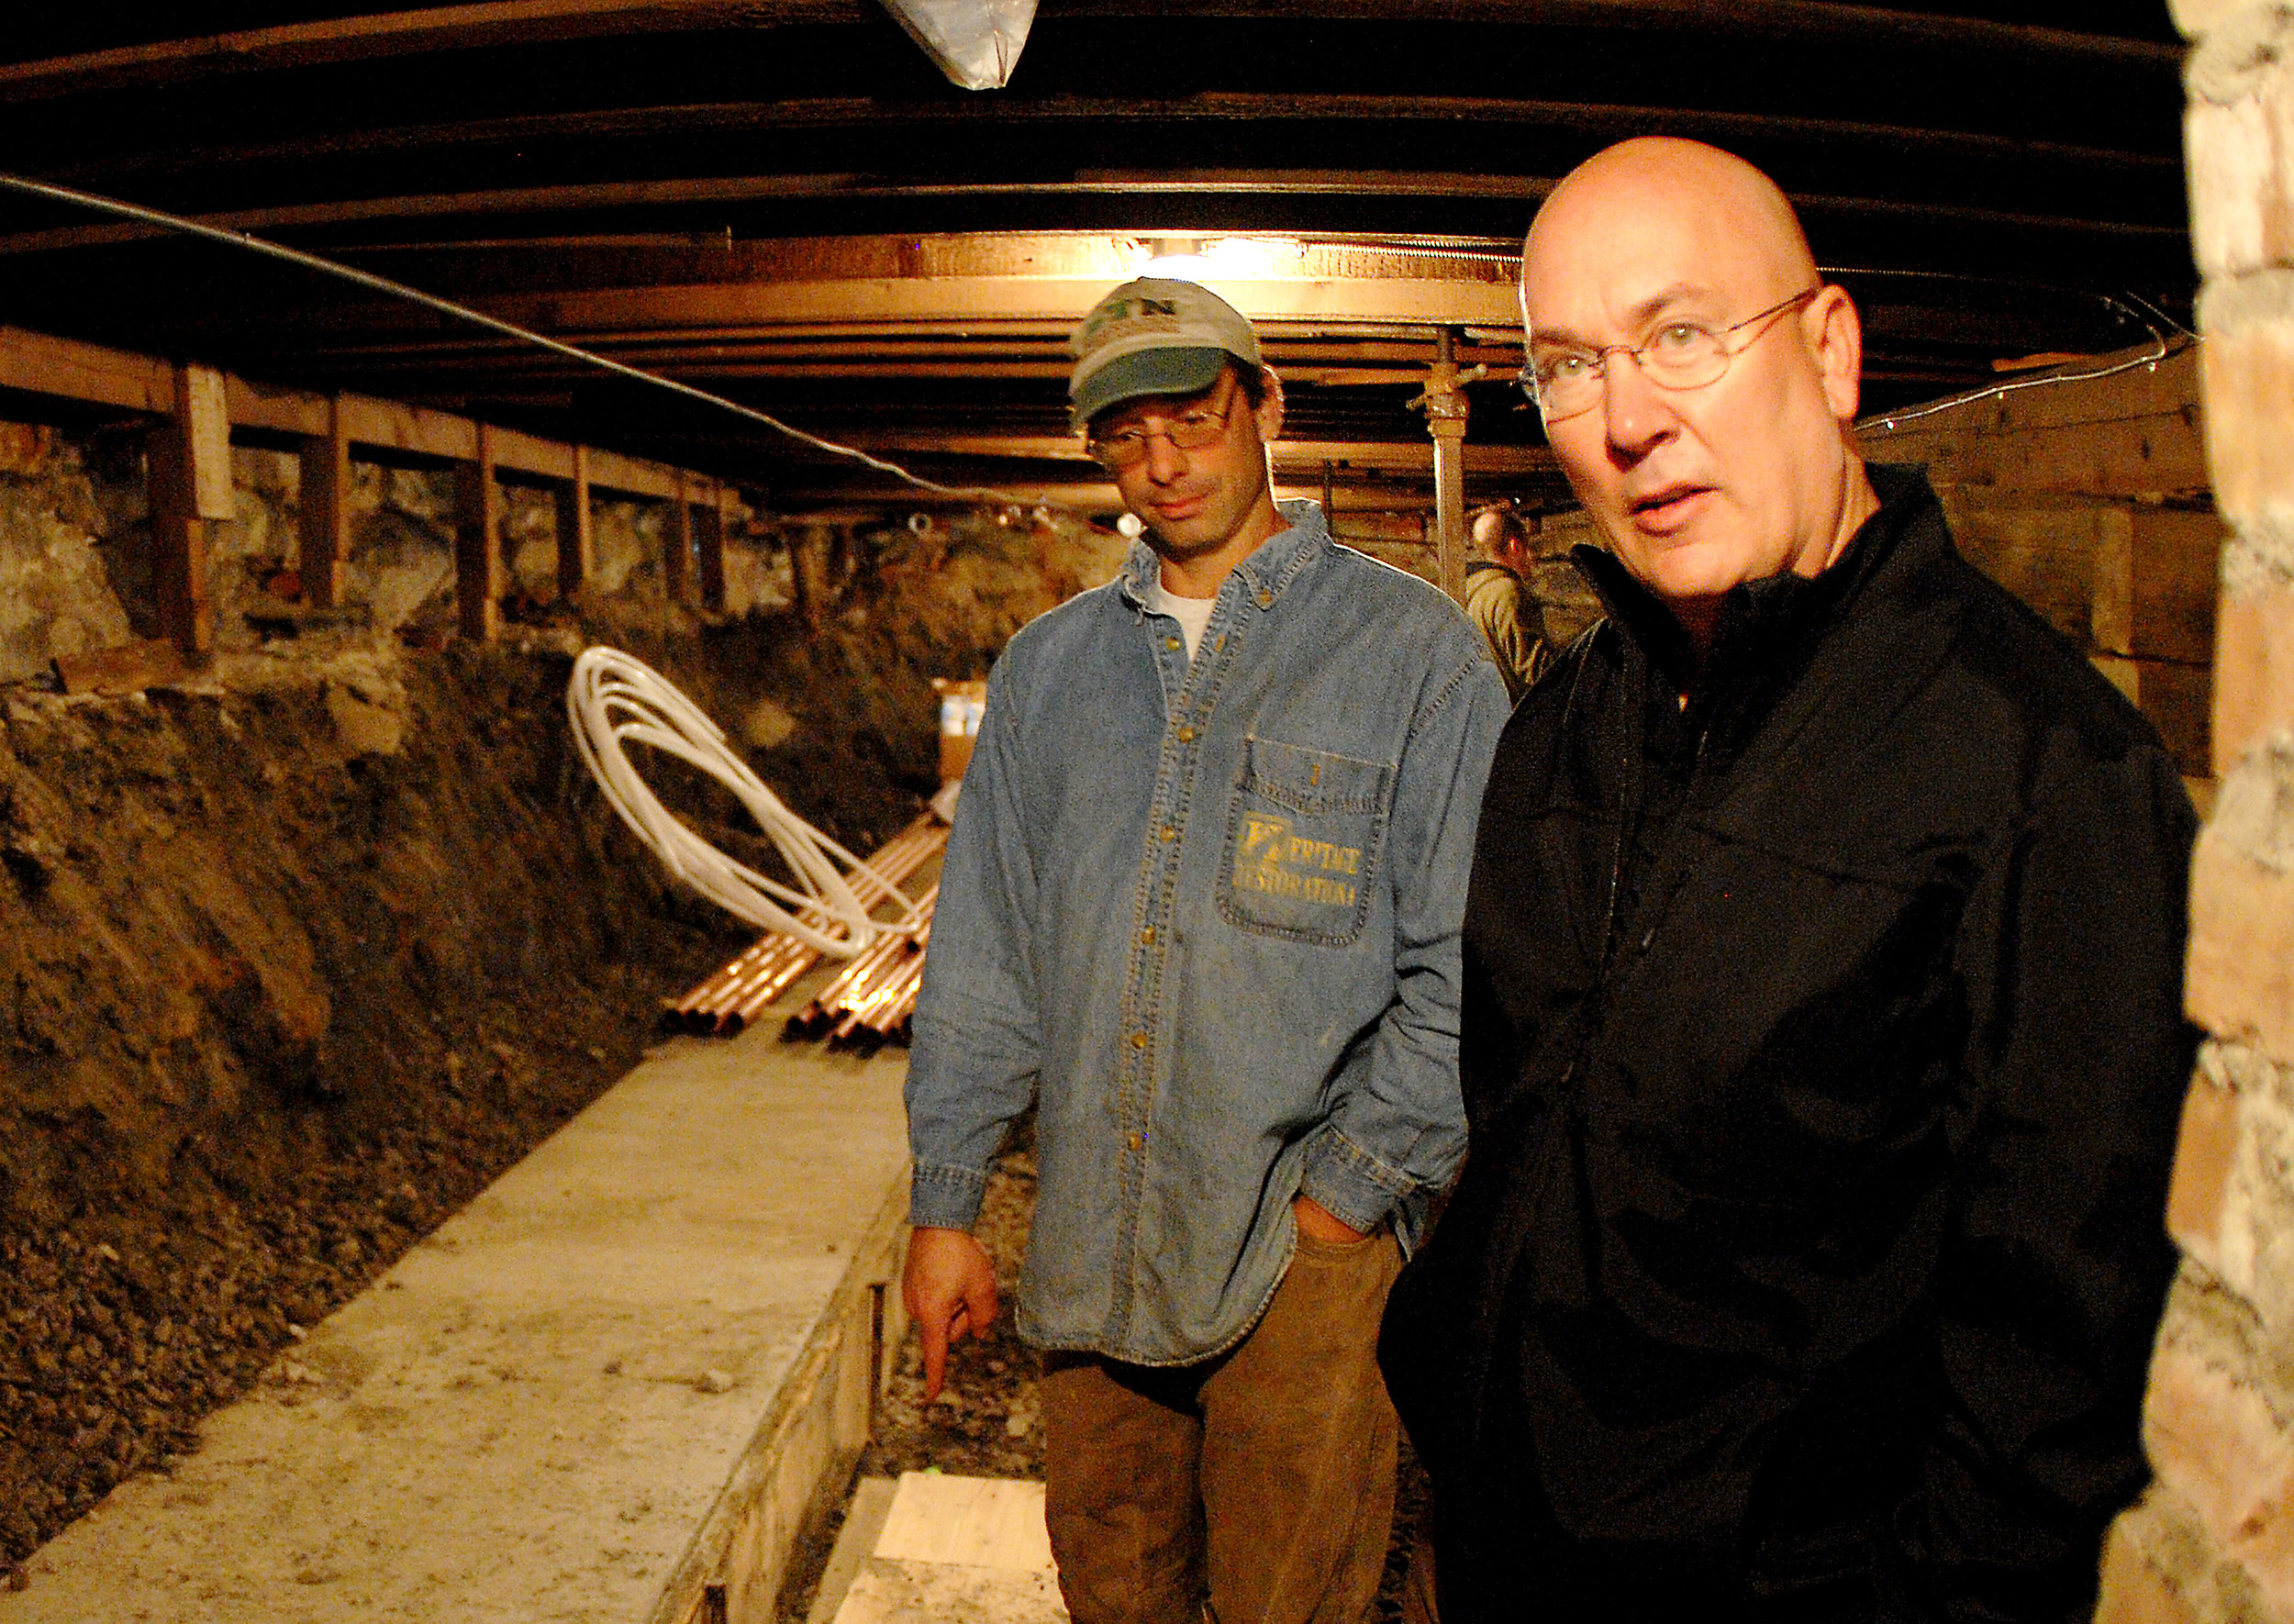 Daniel Randall, former pastor of First Congregational Church in Bristol, shows members of the media around the basement of the church when it was under construction in October, 2011. Randall was found dead at his home in Maine Thursday, after reportedly killing his 27-year-old daughter and himself.